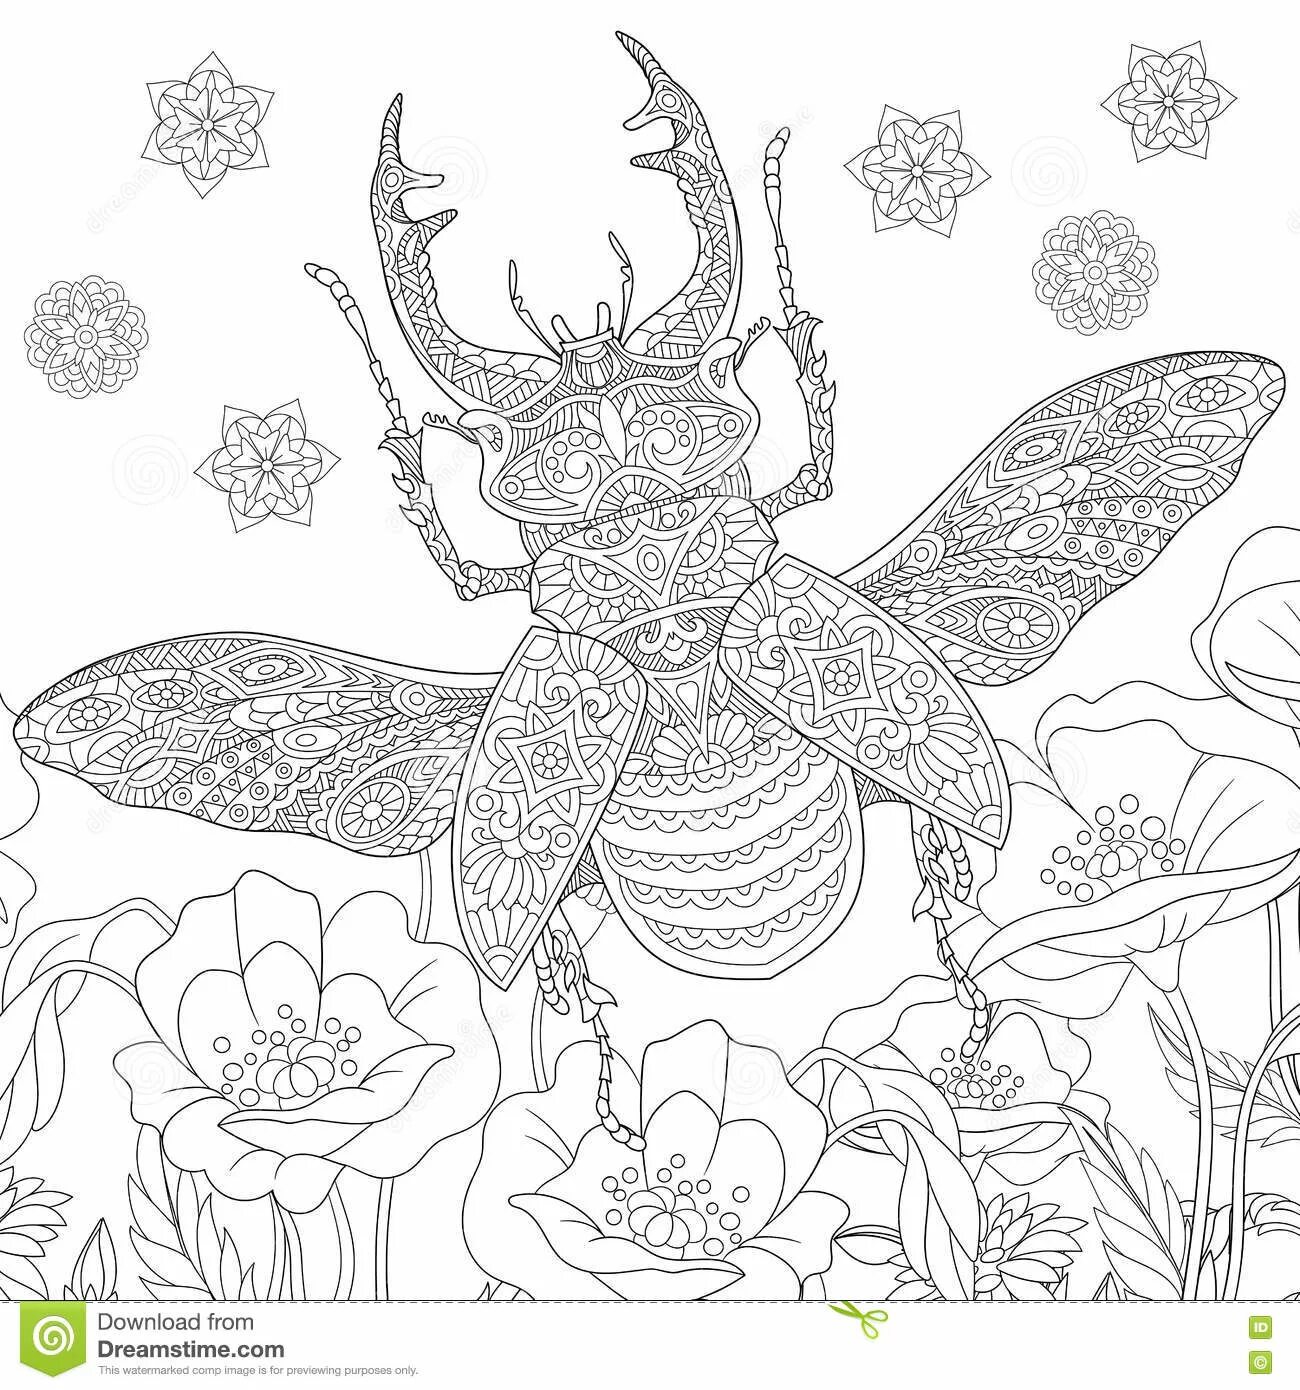 Fascinating anti-stress spider coloring book